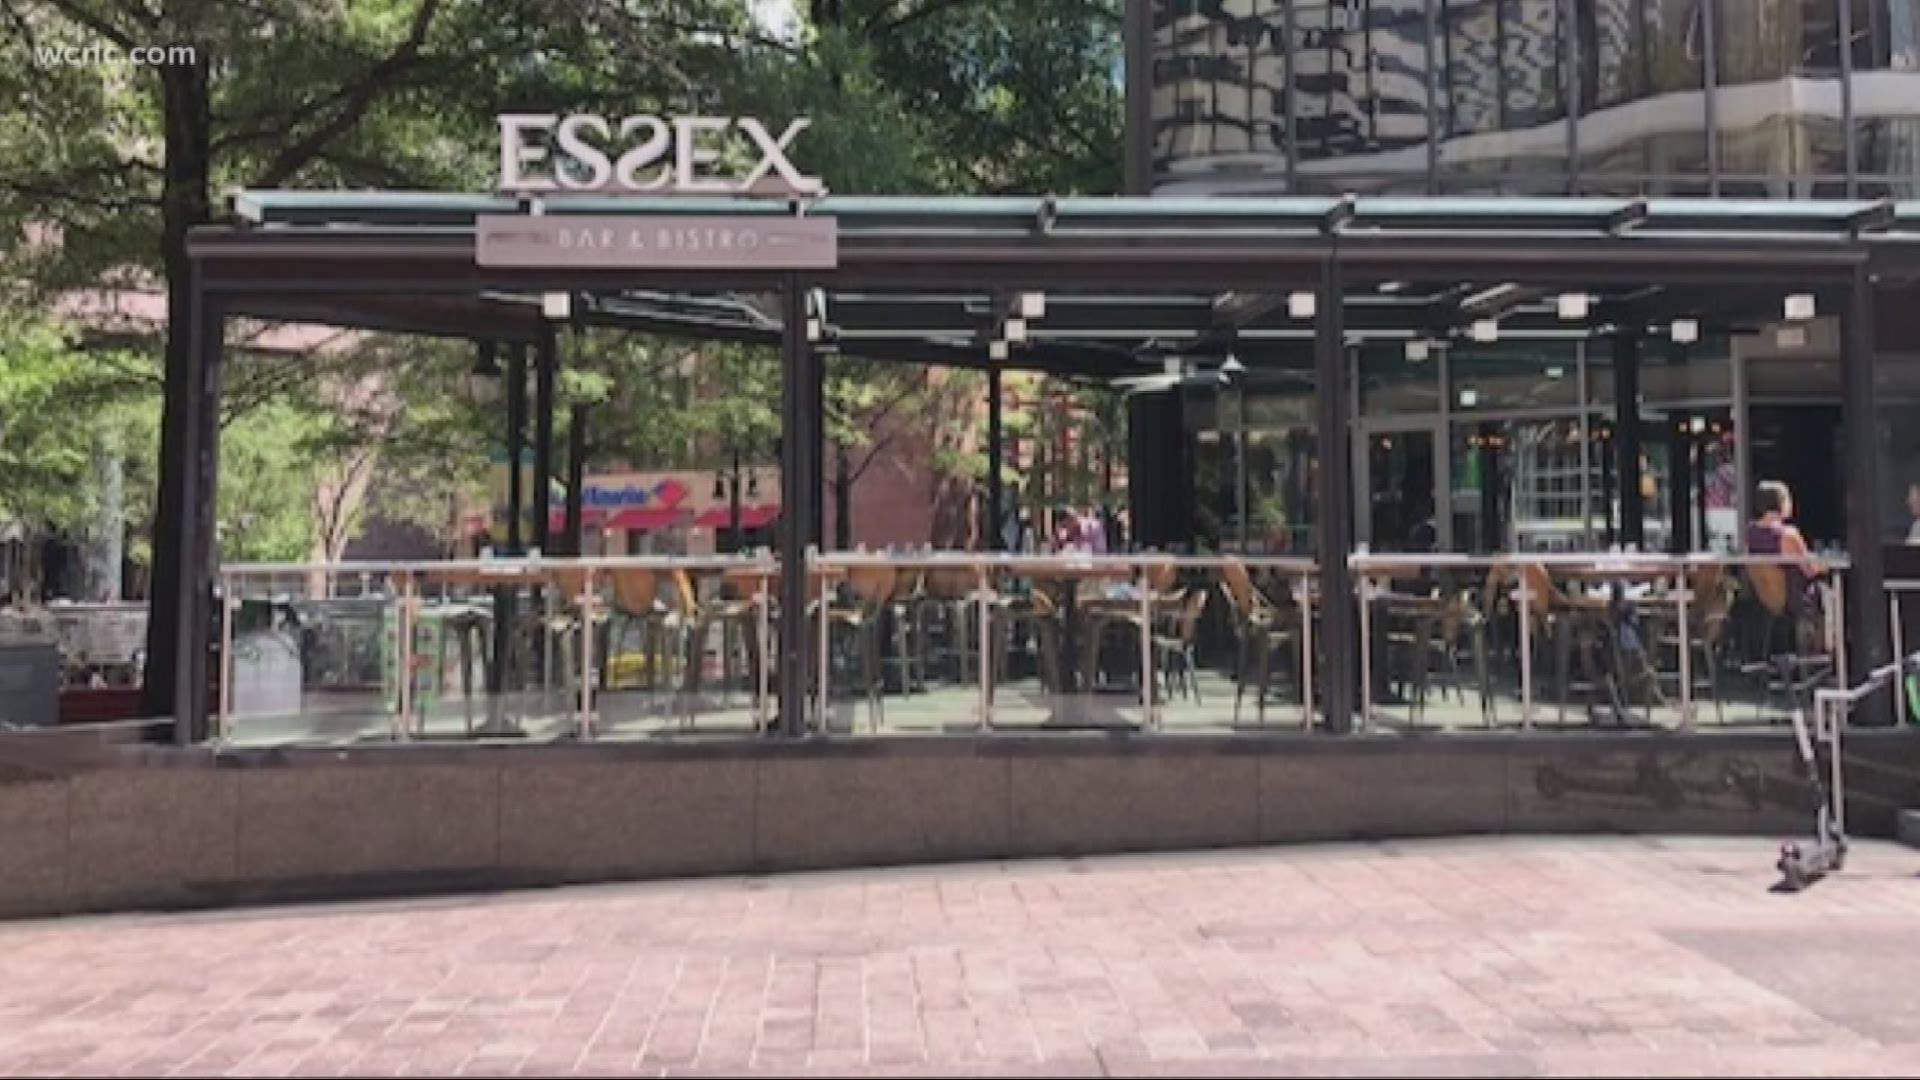 Essex, a popular bistro in uptown Charlotte, was noted for nearly a dozen risk-factor violations during their health inspection. The health inspector found two pages of critical violations, putting them on this week's Restaurant Report Card.